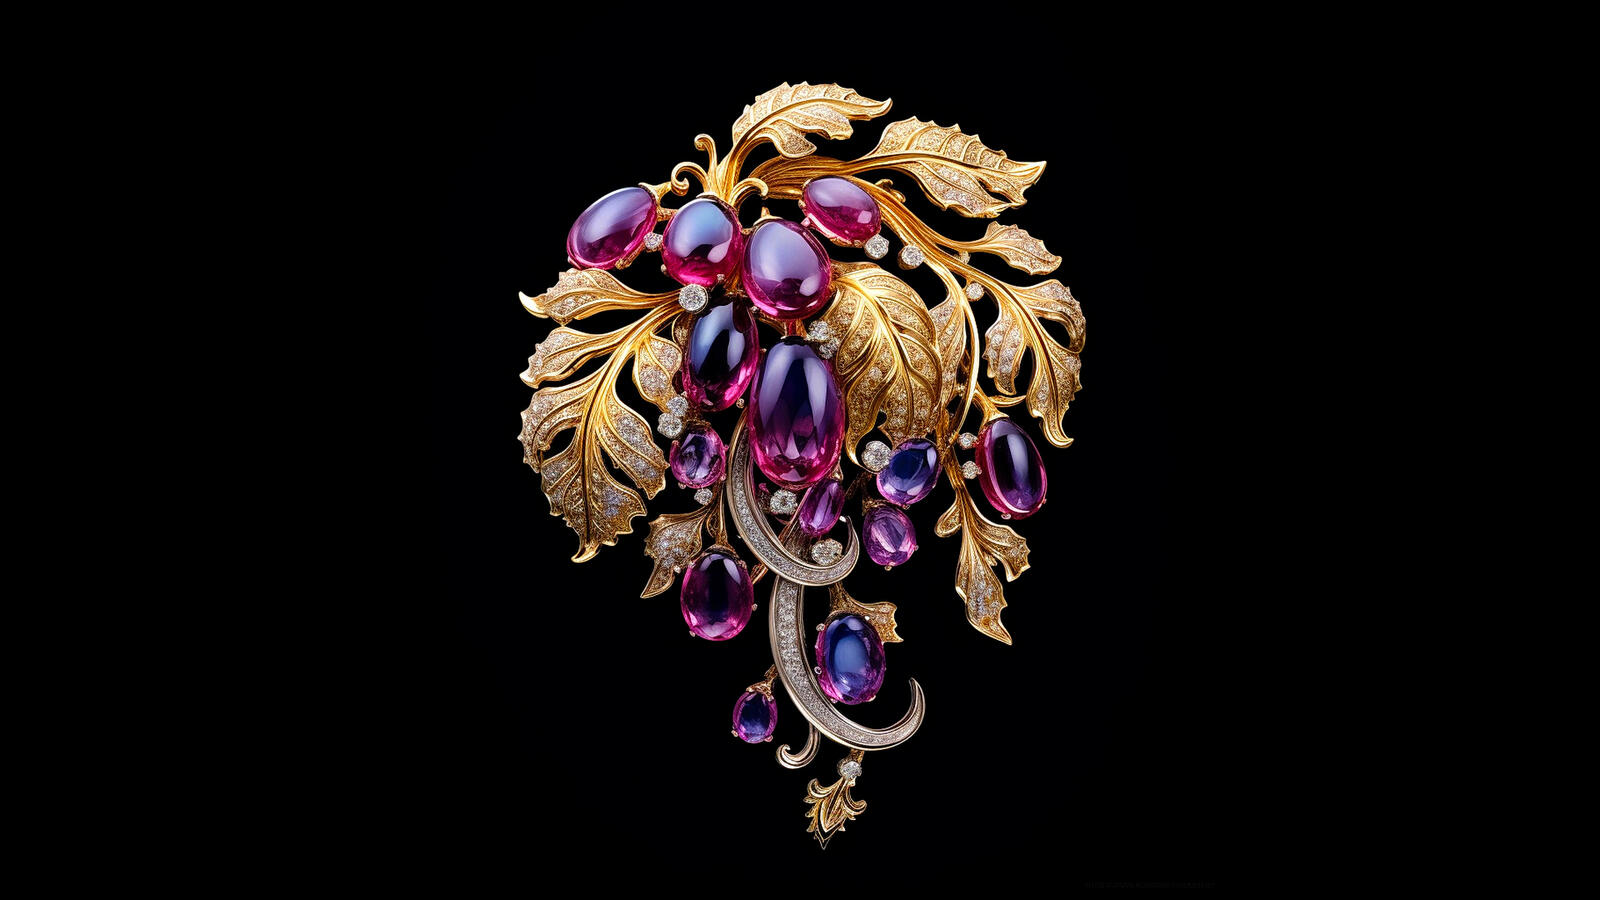 Free photo A bunch of grapes brooch